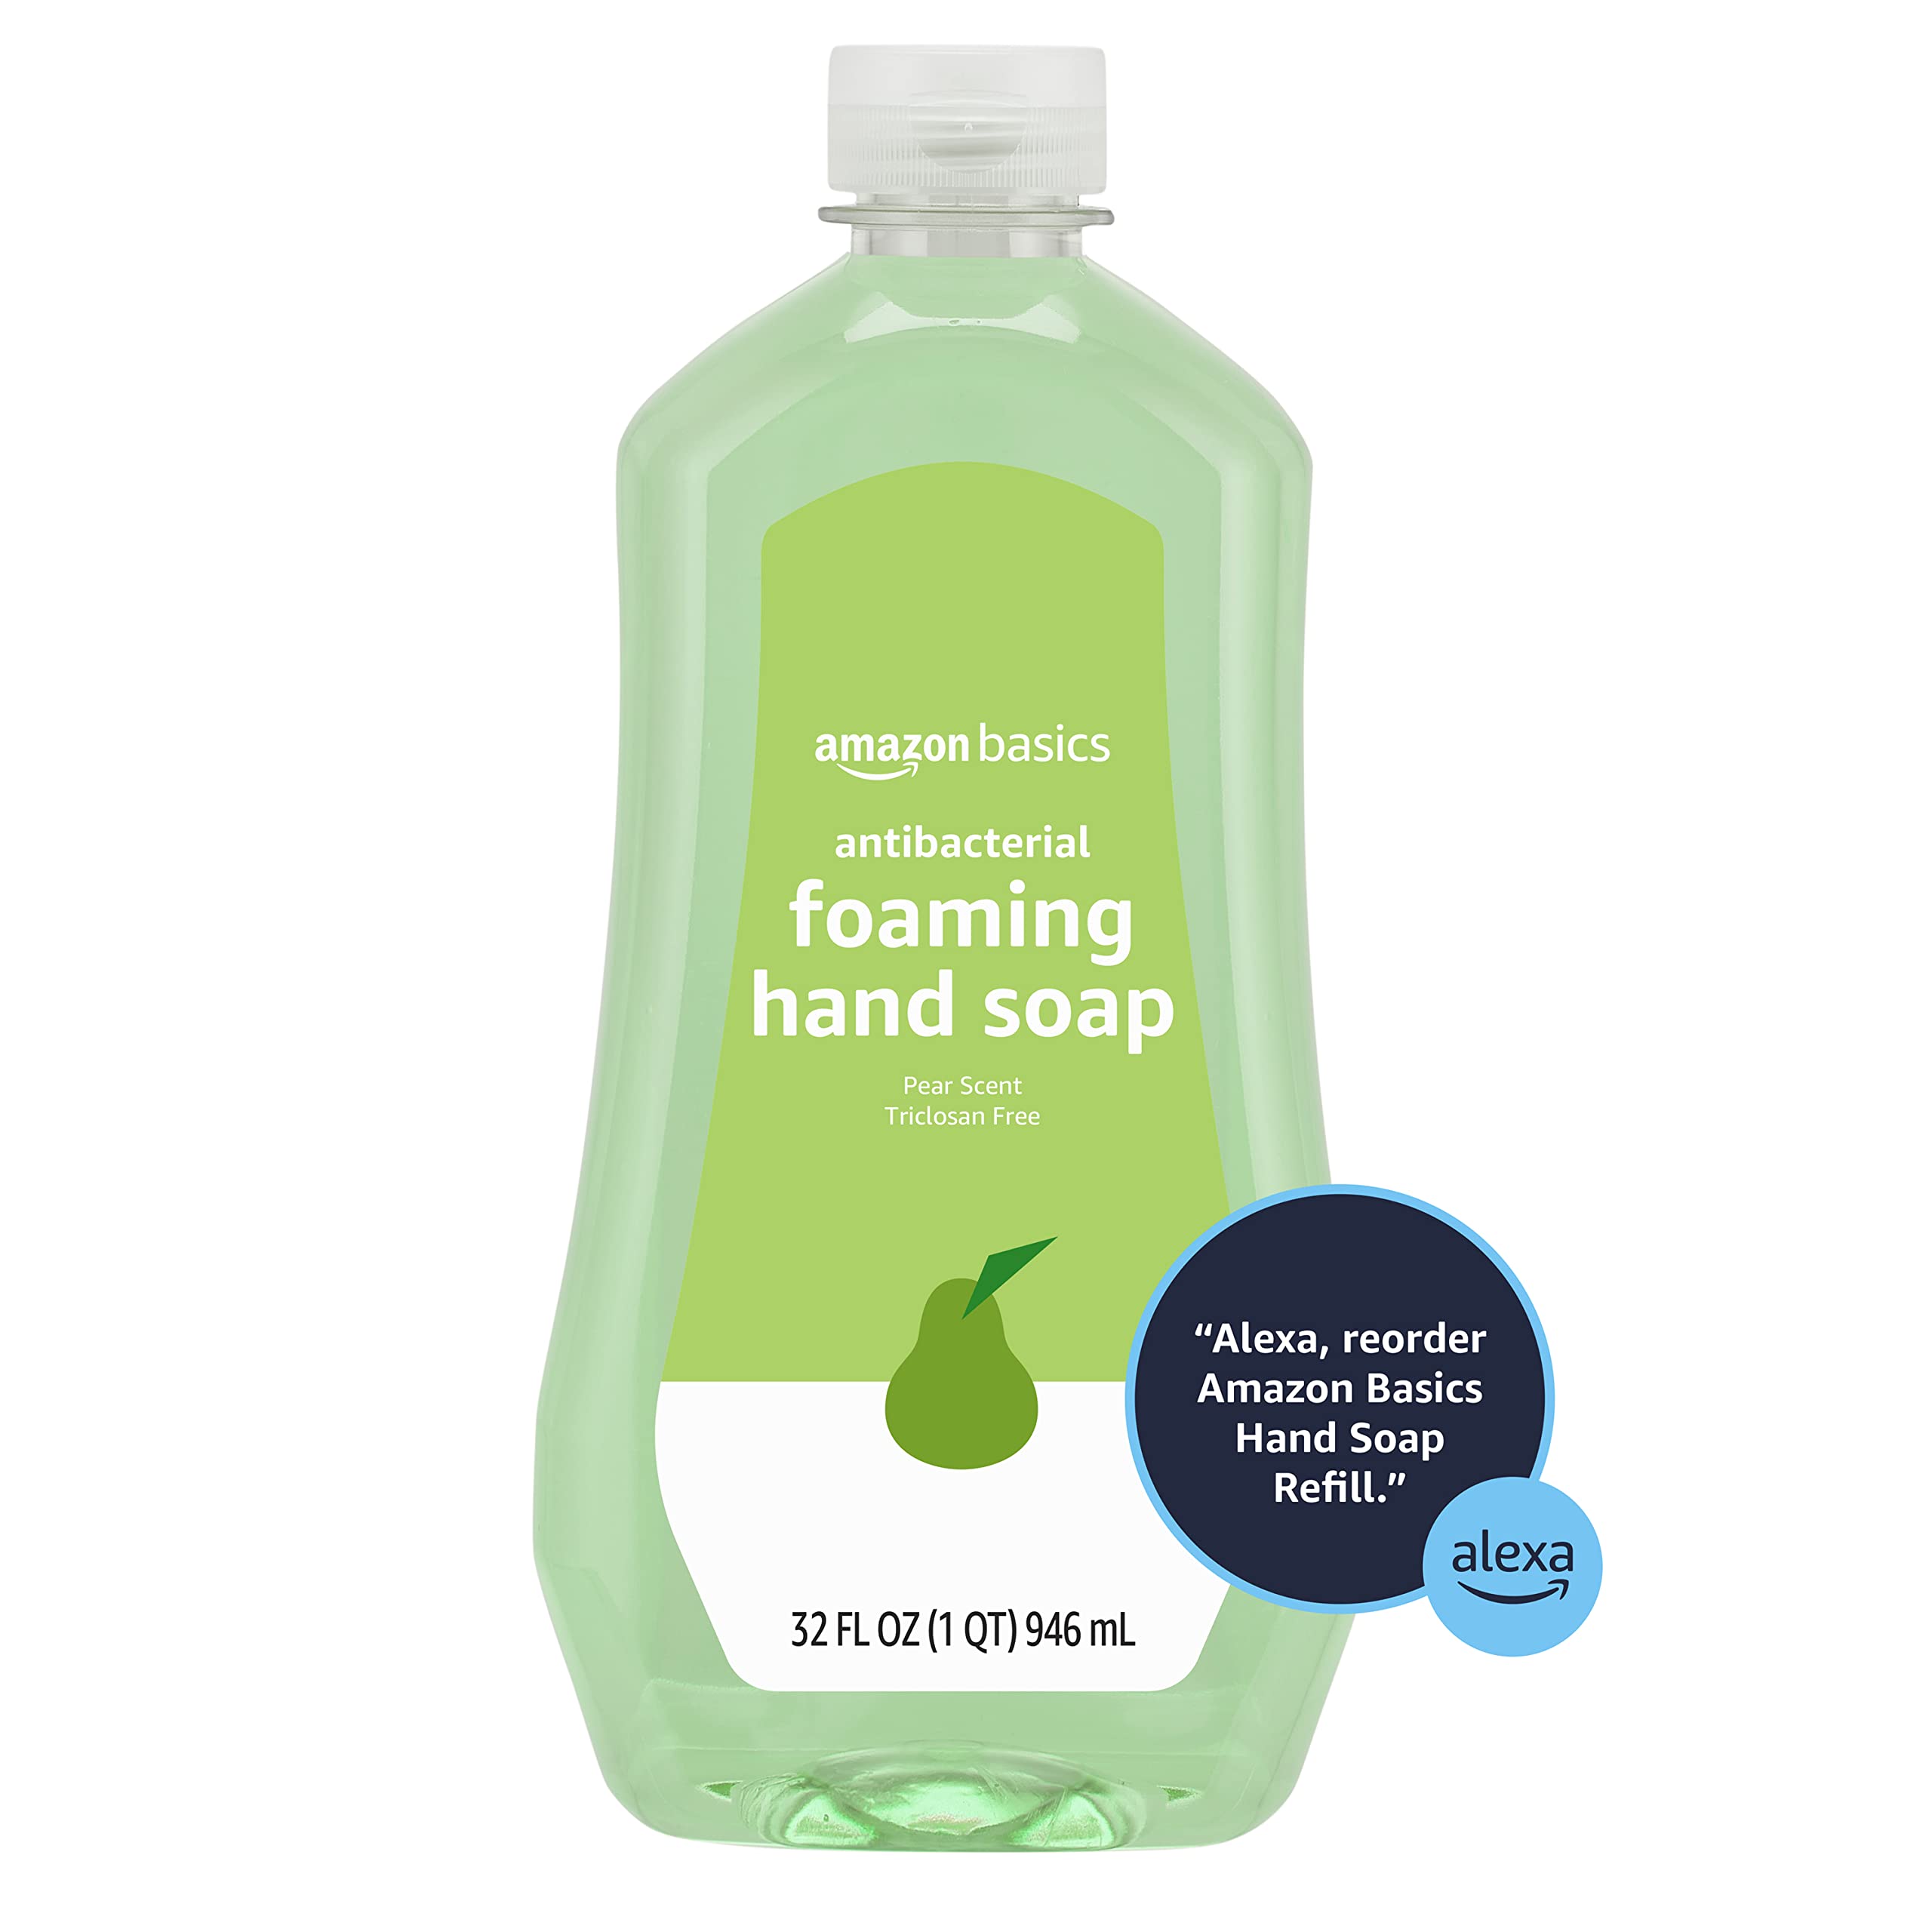 Amazon Basics Foaming Antibacterial Soap Refill, Pear Scent, Triclosan-Free, 32 Fluid Ounces (ONLY Fits Foaming Dispensers), 1-Pack (Previously Solimo)